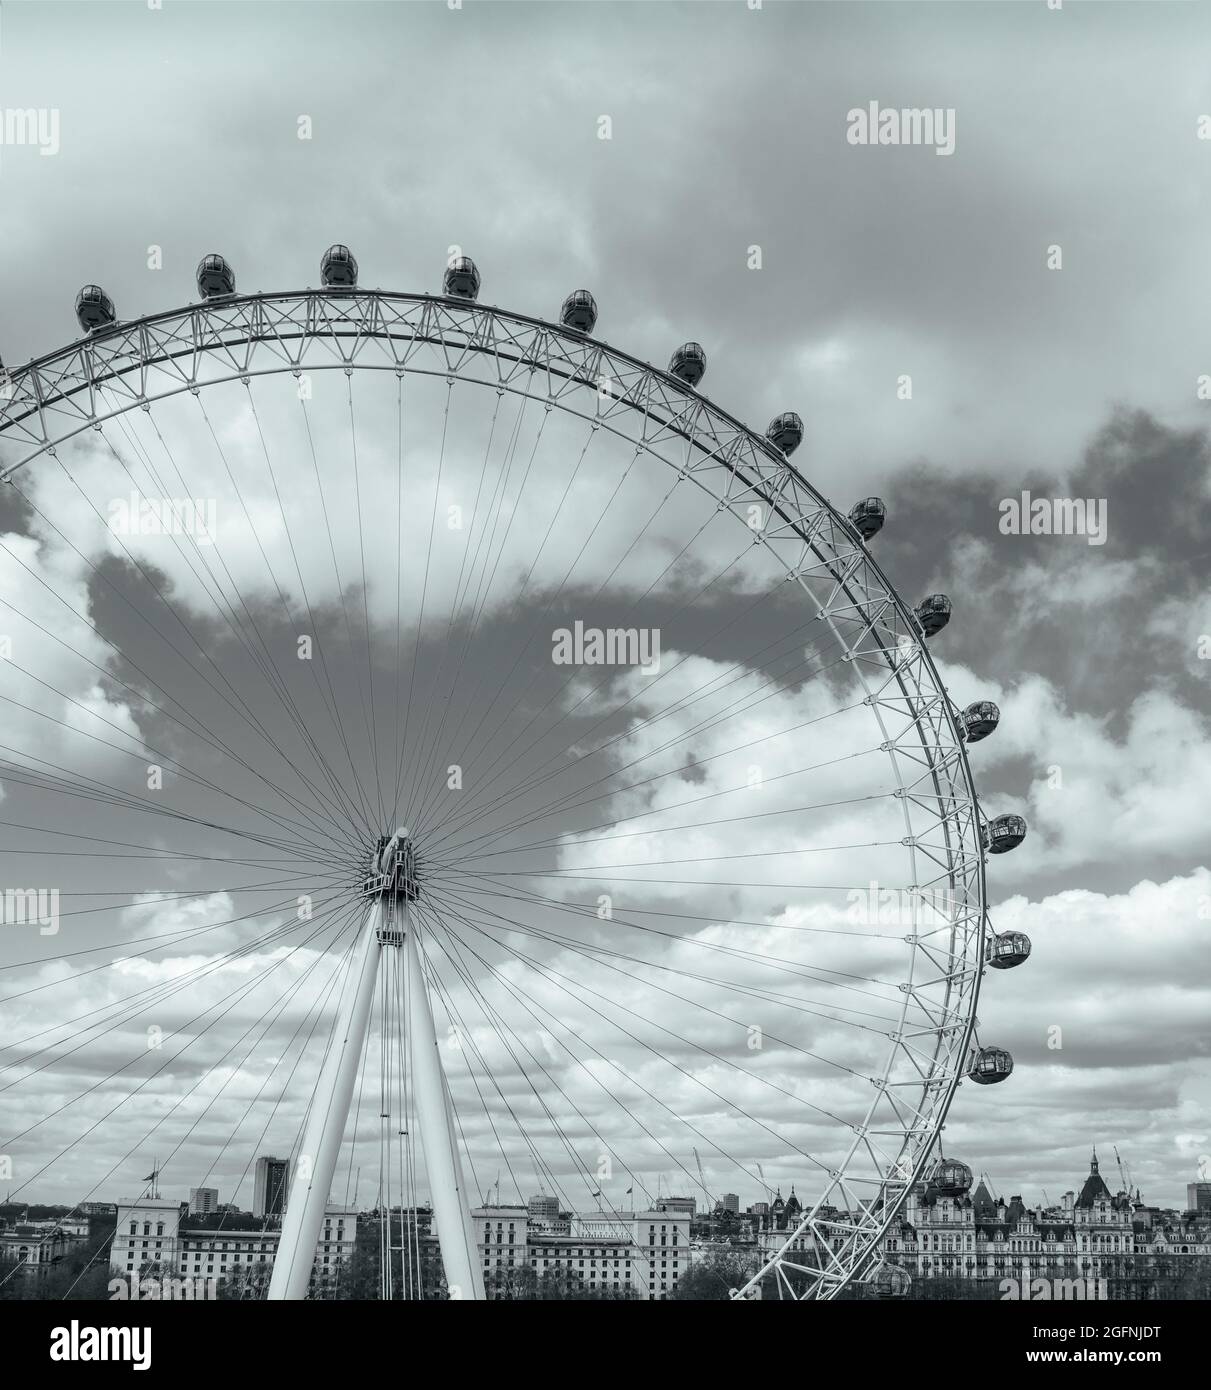 A view of the London Eye from a different perspective in London, UK. Stock Photo